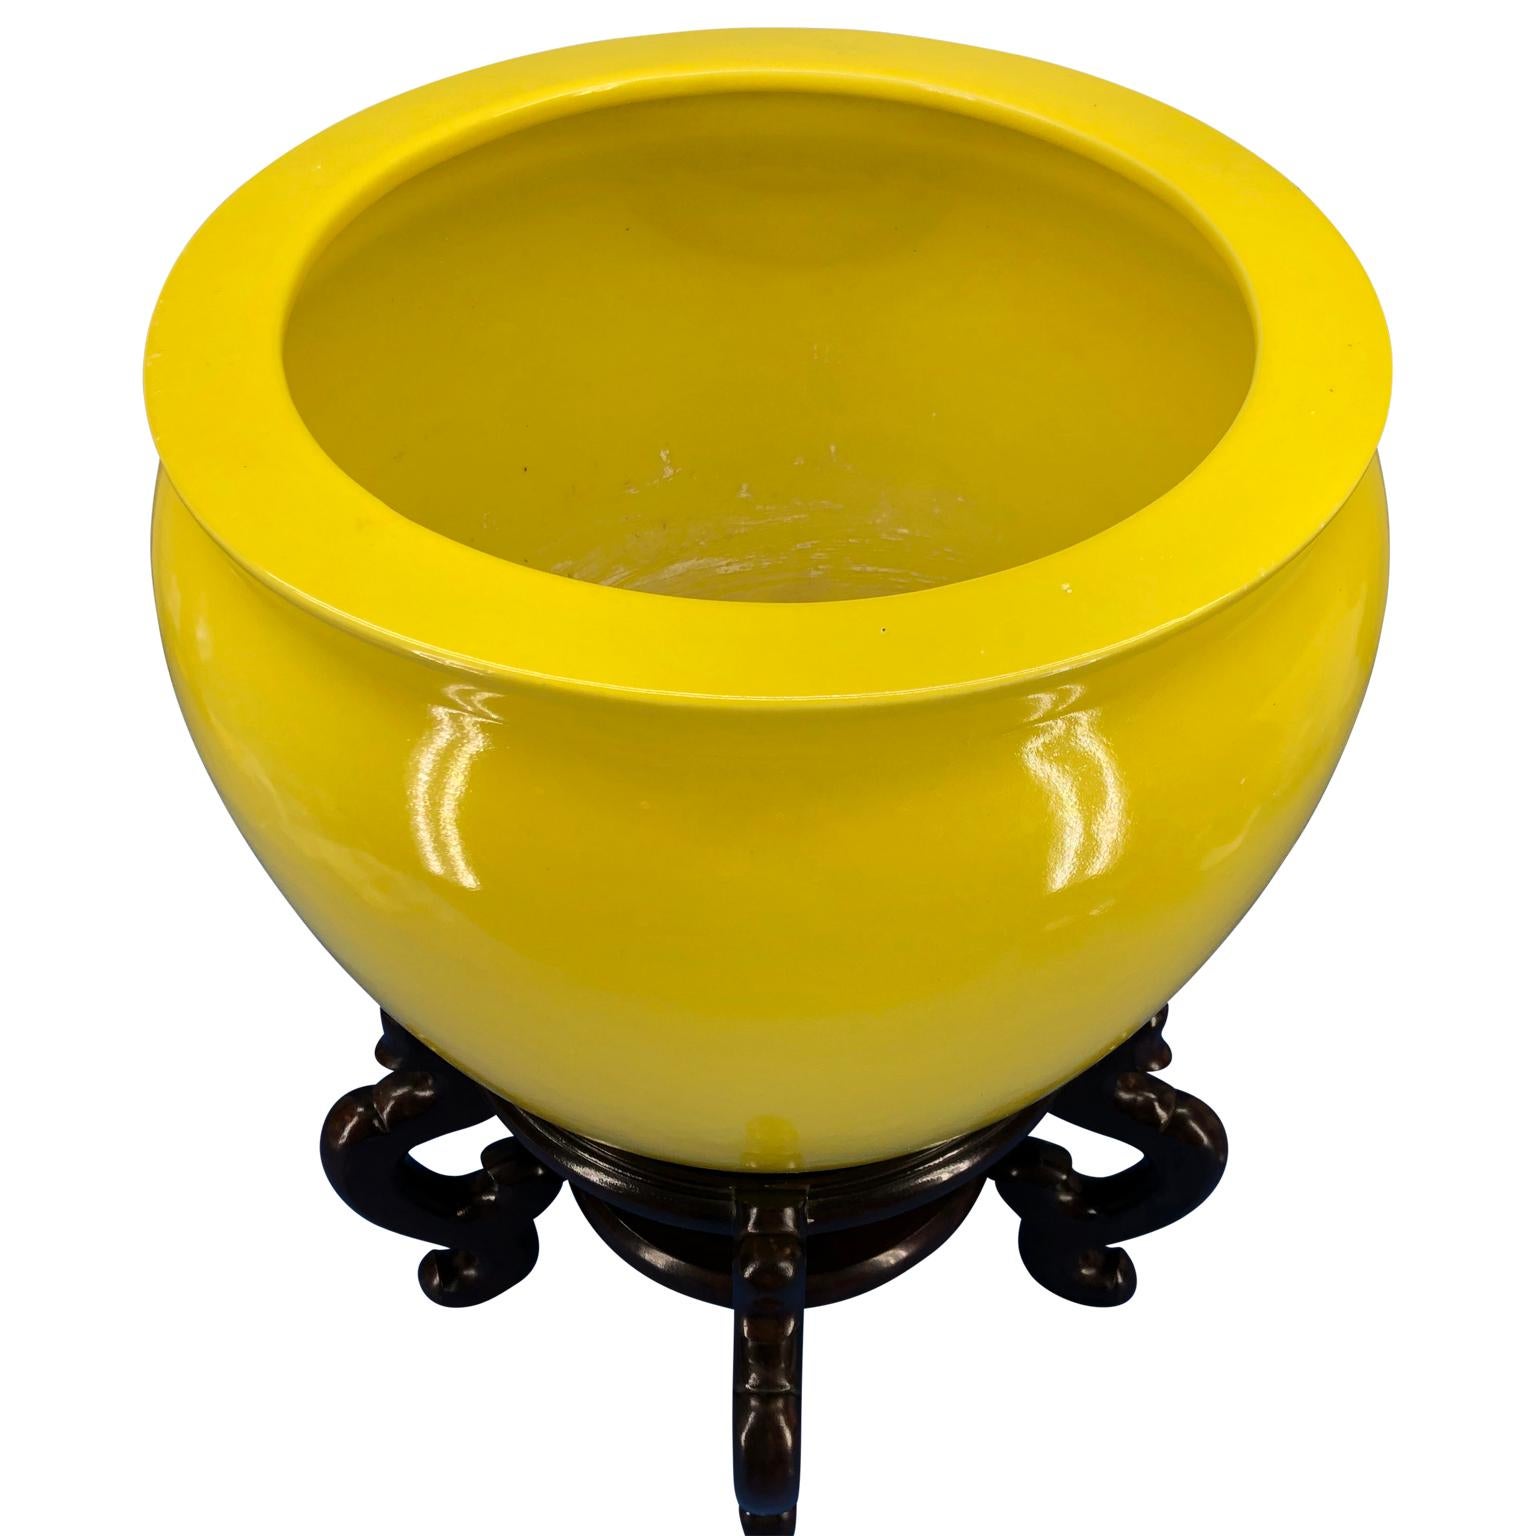 Chinese Large Bright Yellow Hand Painted Porcelain Jardinière Bowl on a Wooden Stand For Sale